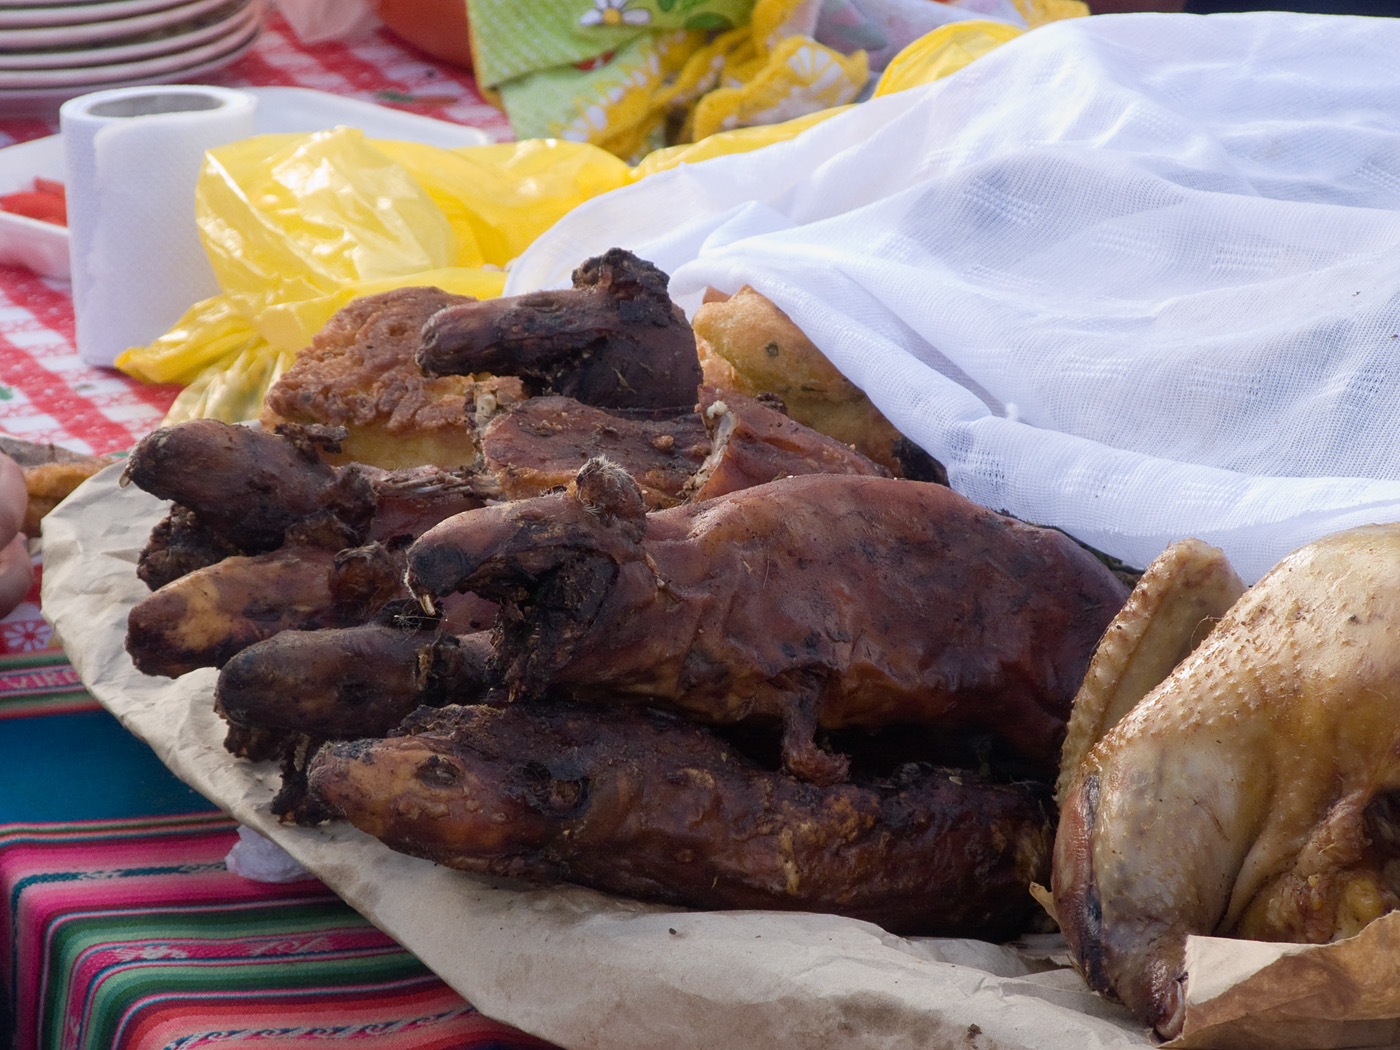 Street stall selling cooked guinea pig, Cusco